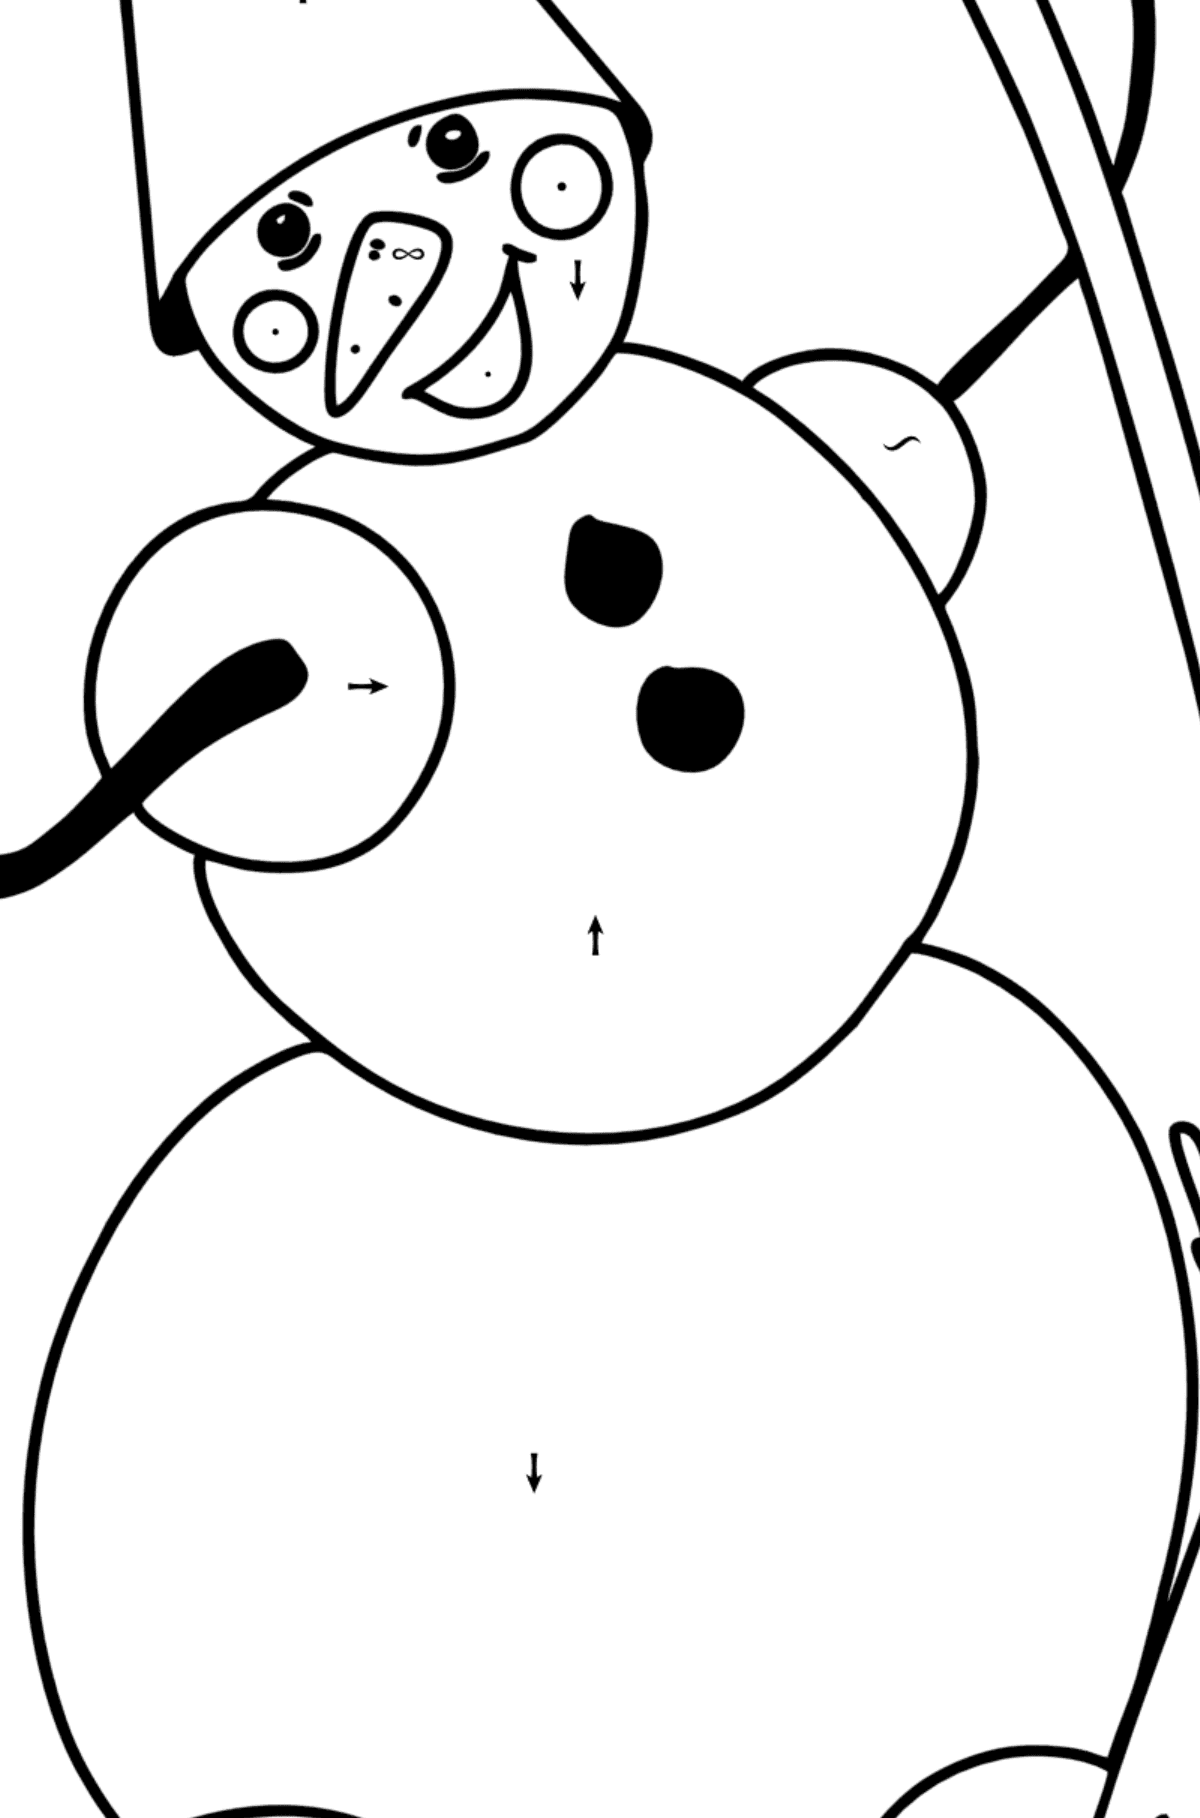 Snowman with Broom coloring page - Coloring by Symbols for Kids